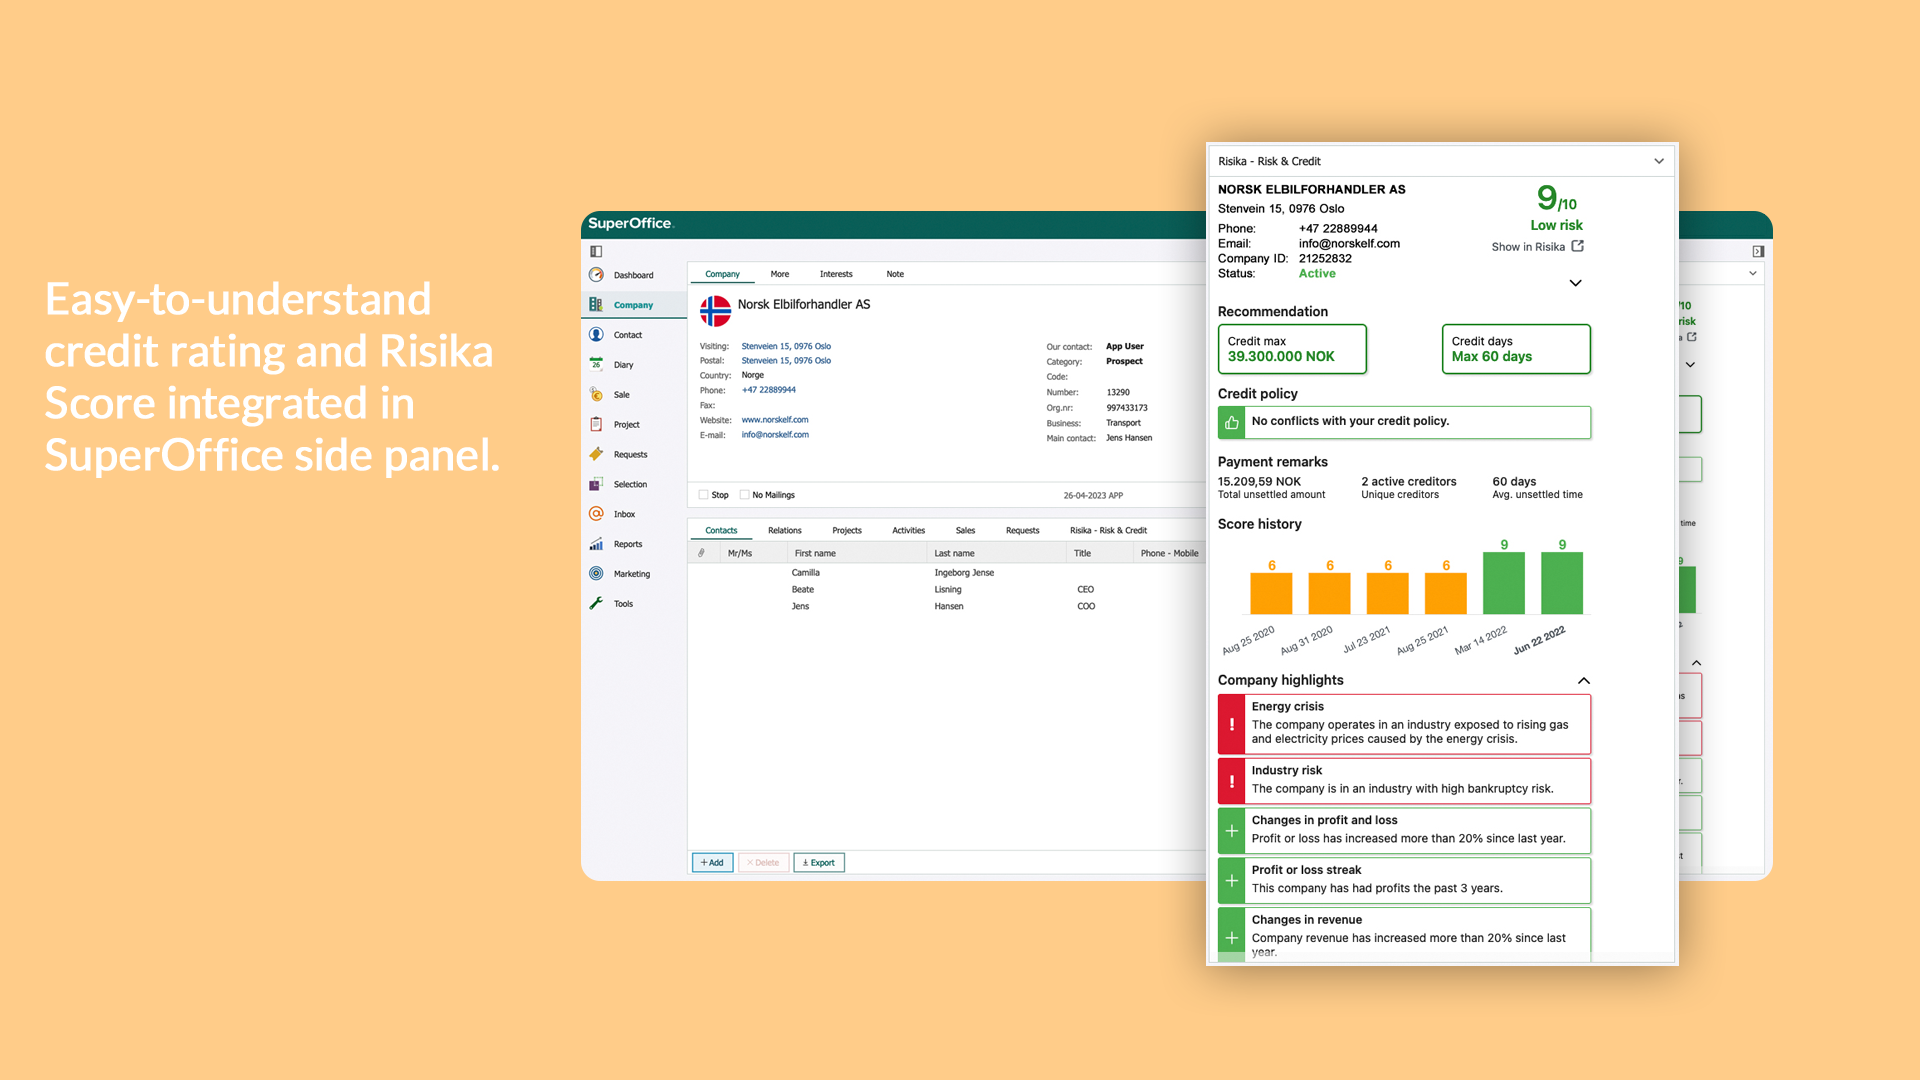 1 Easy-to-understand credit rating and Risika score integrated in SuperOffice.